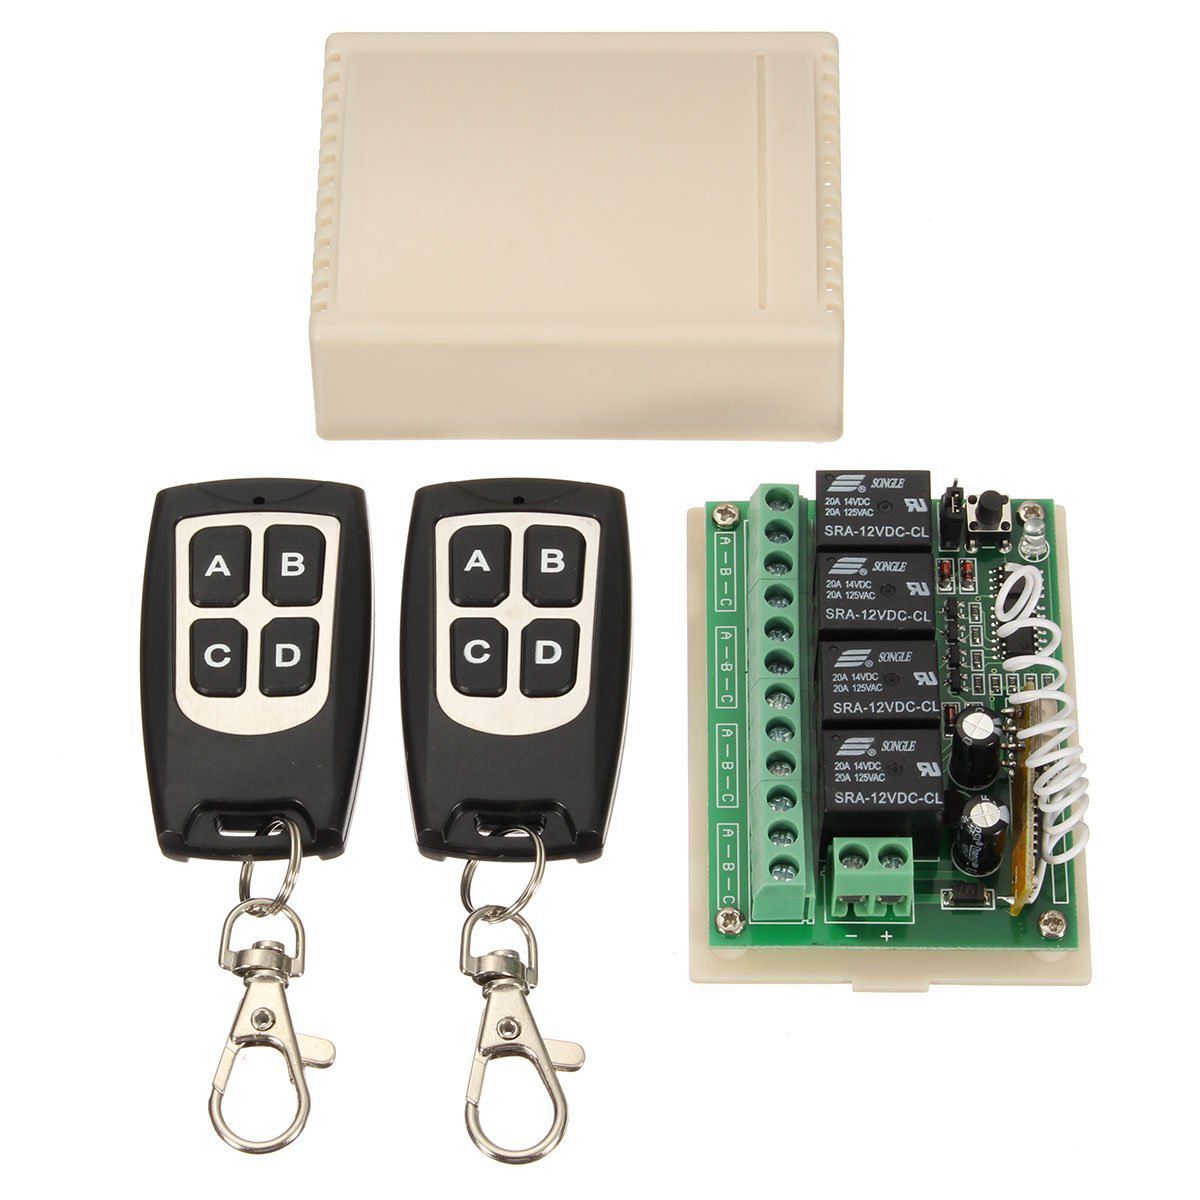 12V 4CH Channel 433Mhz Wireless Remote Control Switch Integrated Circuit with 2 Transmitter DIY Replace Parts Tool Kits